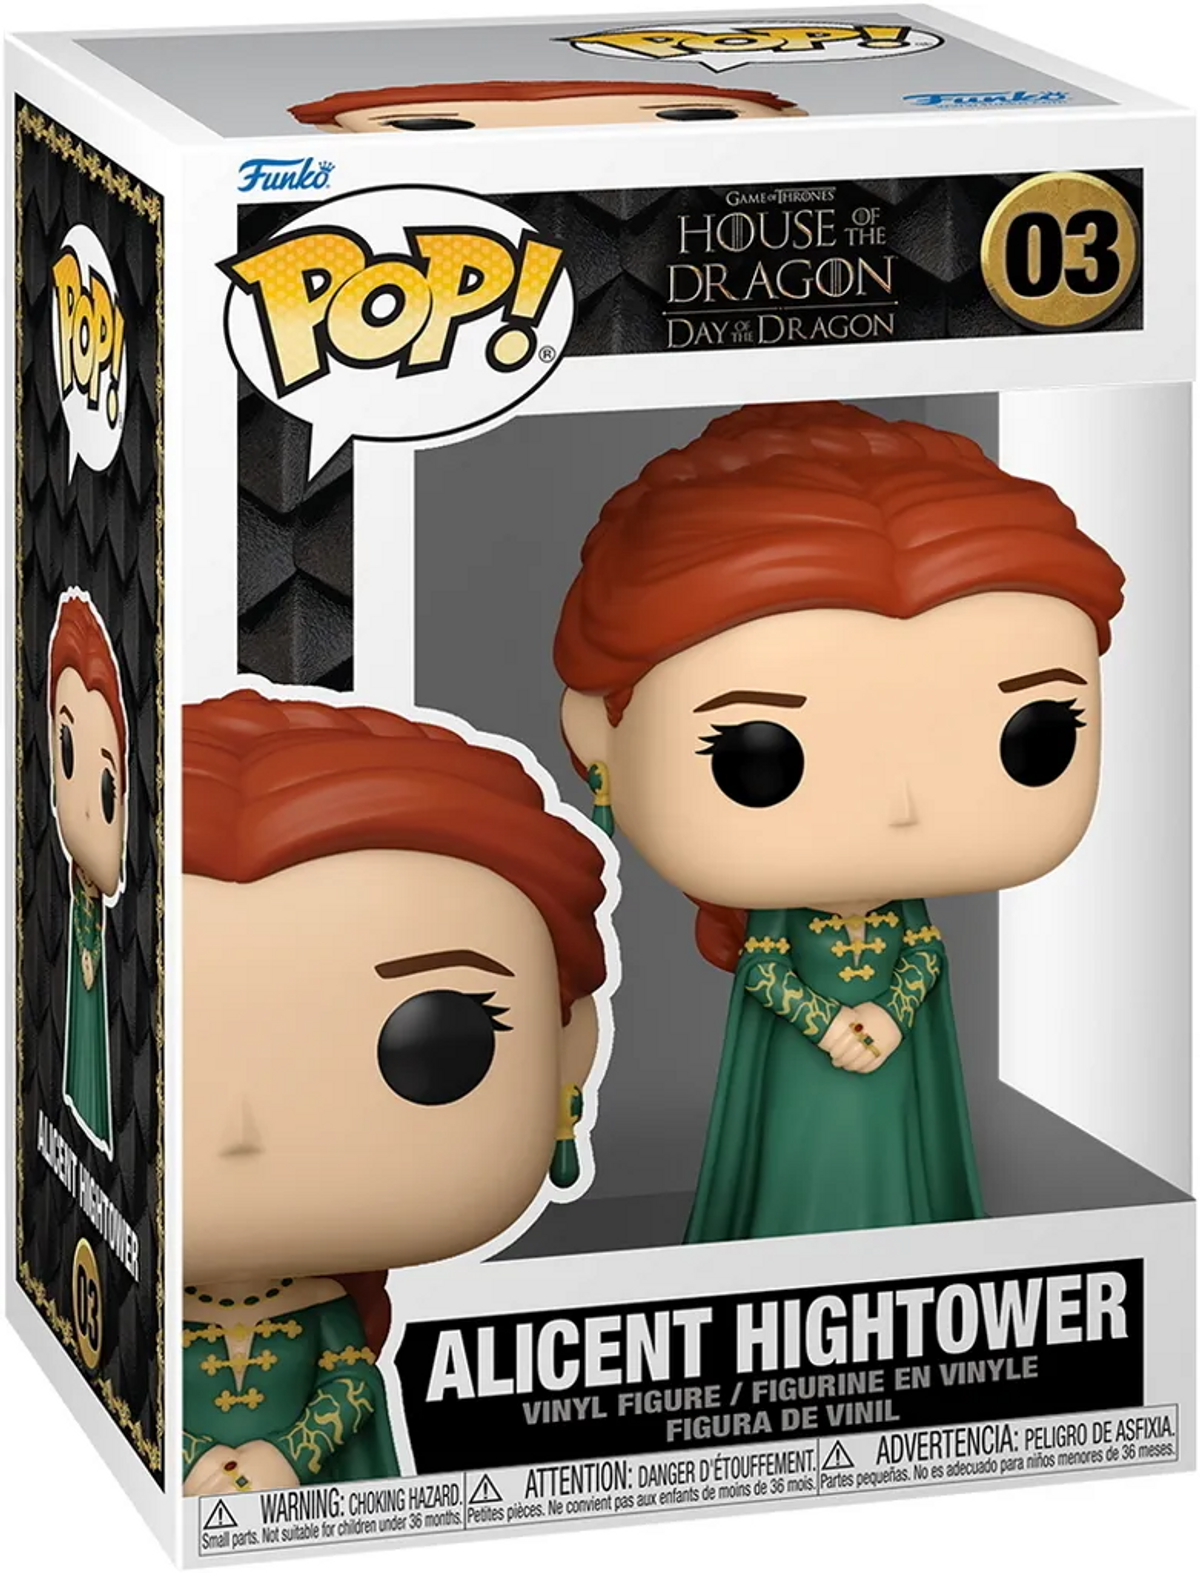 Alicent of POP - - Dragon House Hightower the